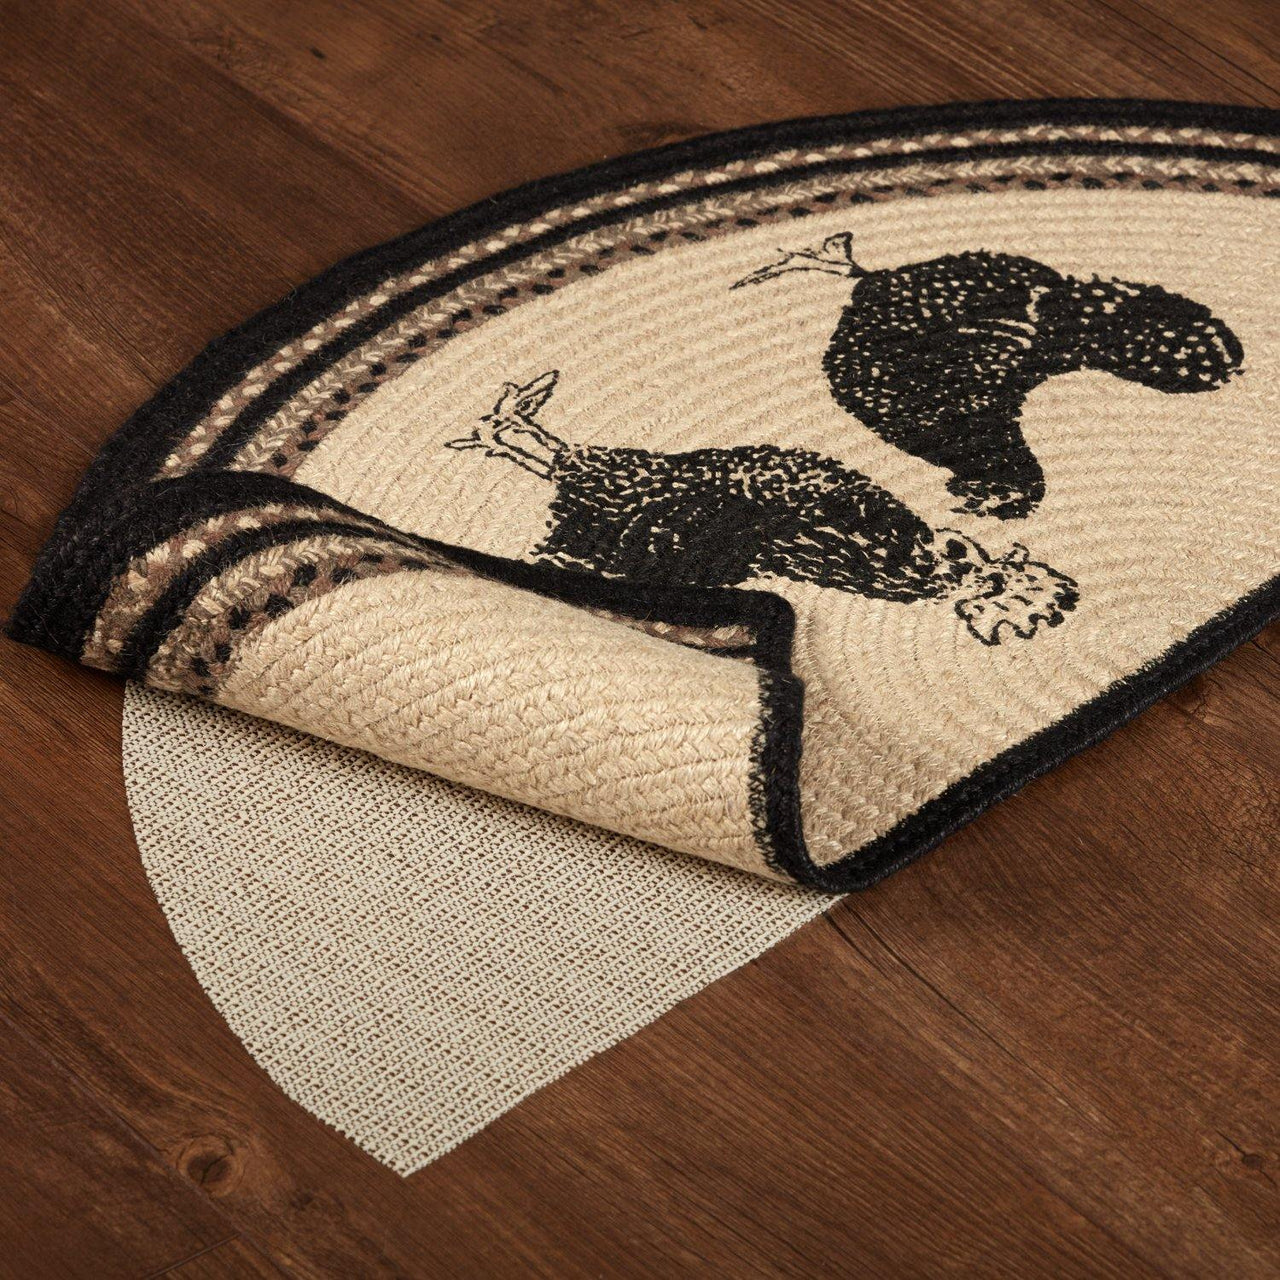 Sawyer Mill Charcoal Poultry Jute Braided Rug Half Circle 16.5"x33" with Rug Pad VHC Brands - The Fox Decor